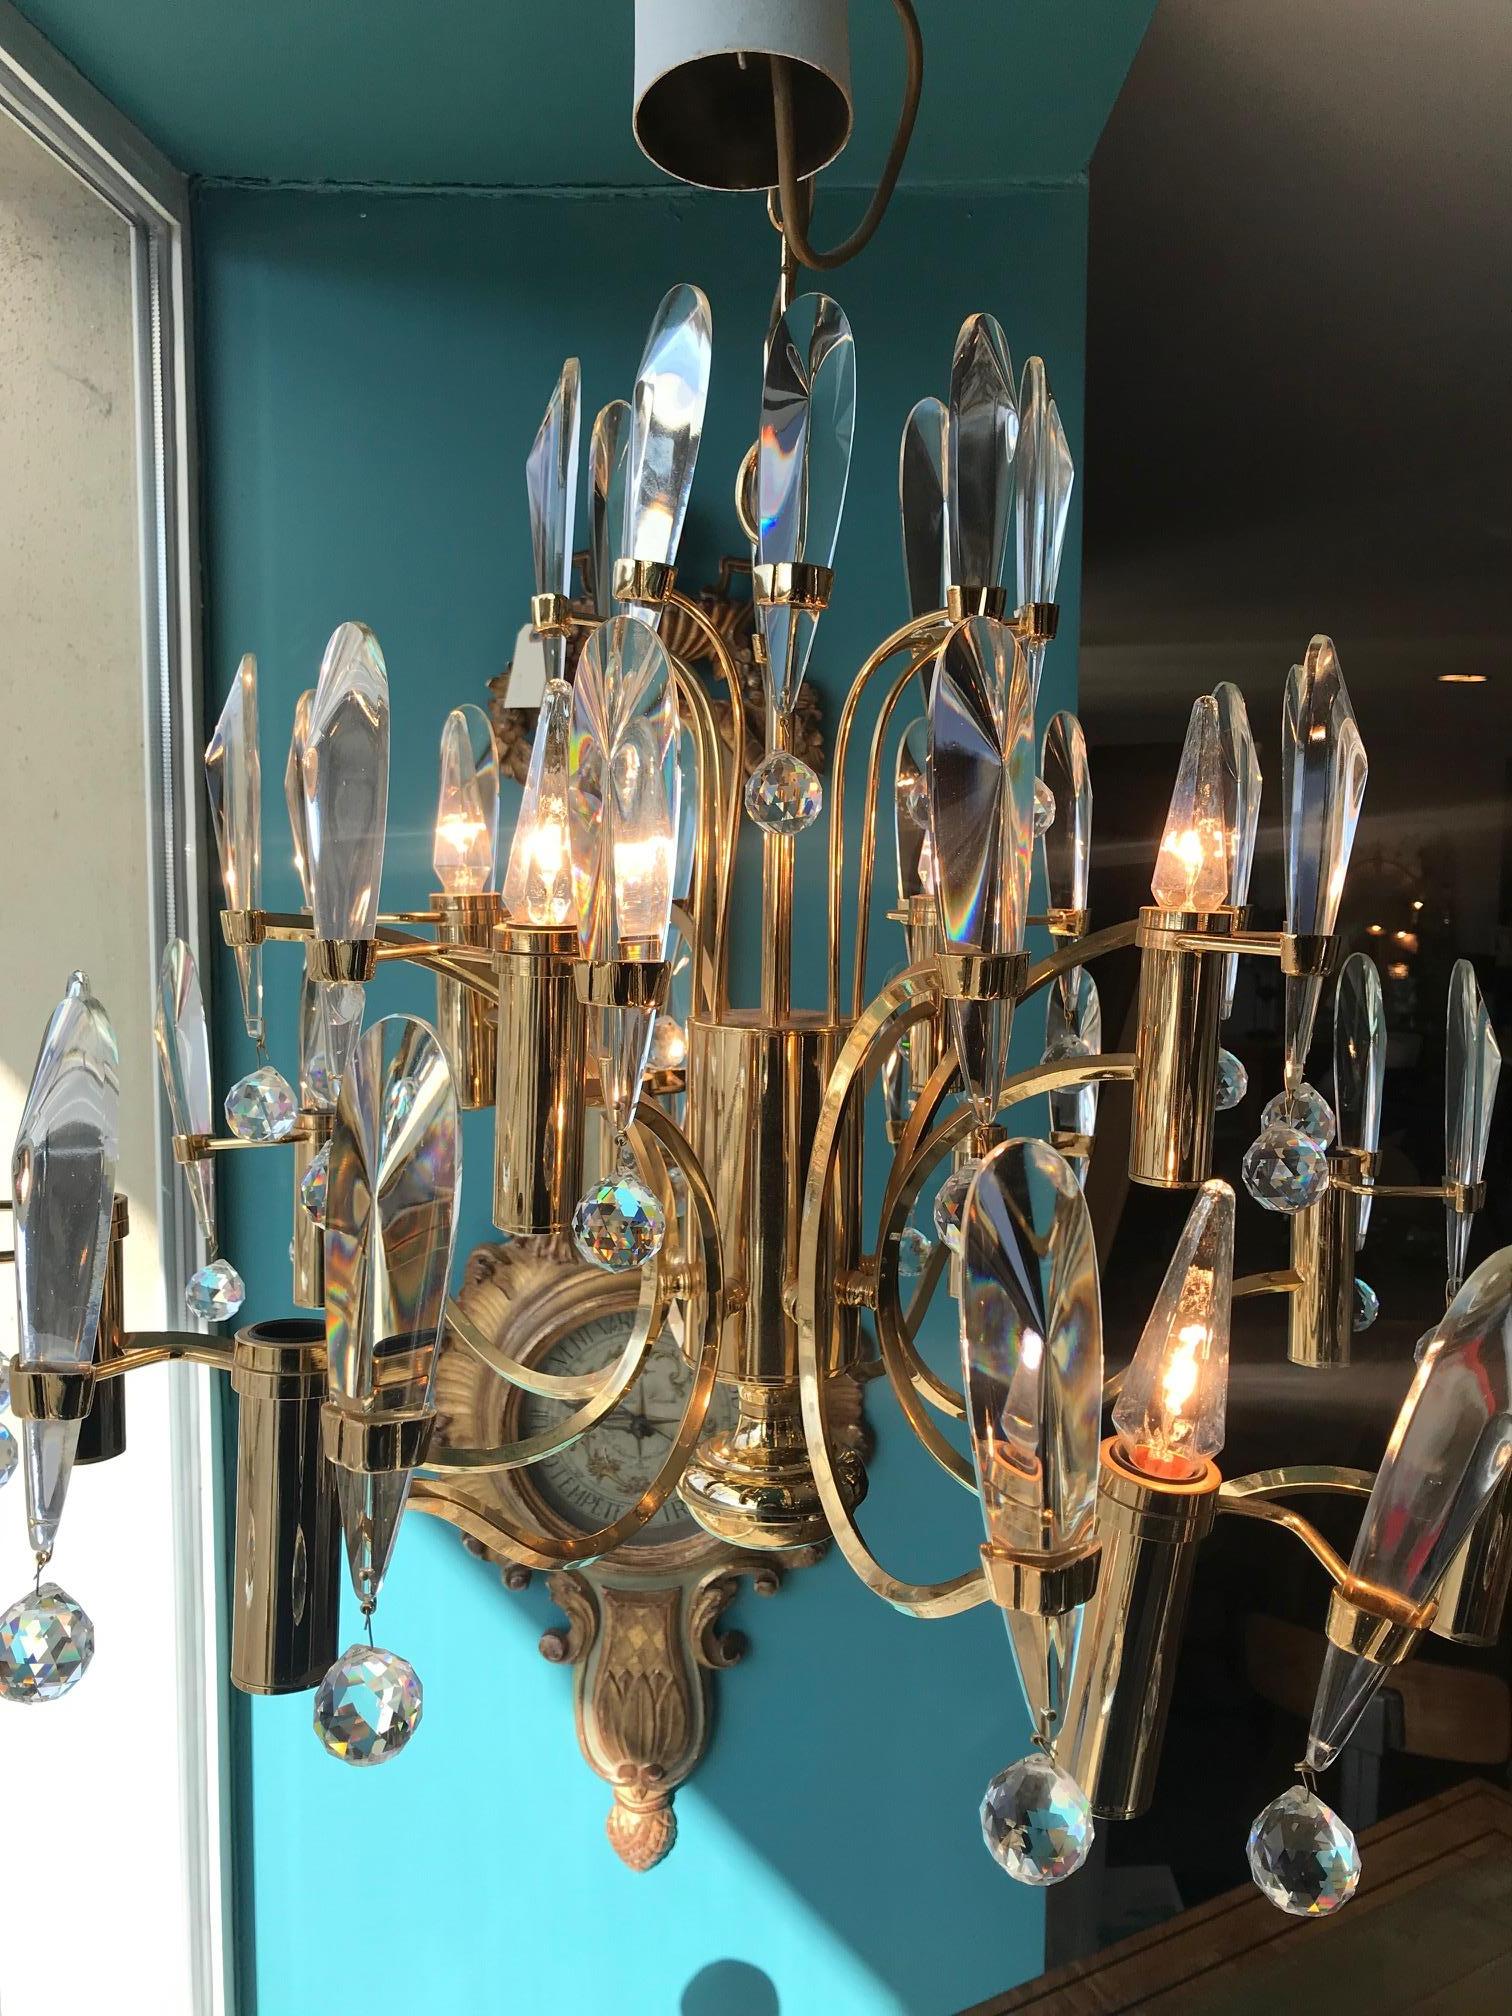 Exceptional 20th century crystal and gilded brass chandelier by the italian designer Gaetano Scoliari from the 1970s.
Twelves Boheme candle lights, very original shape. crystal drops laid on brass pipes.
Each crystal pieces could be removed for